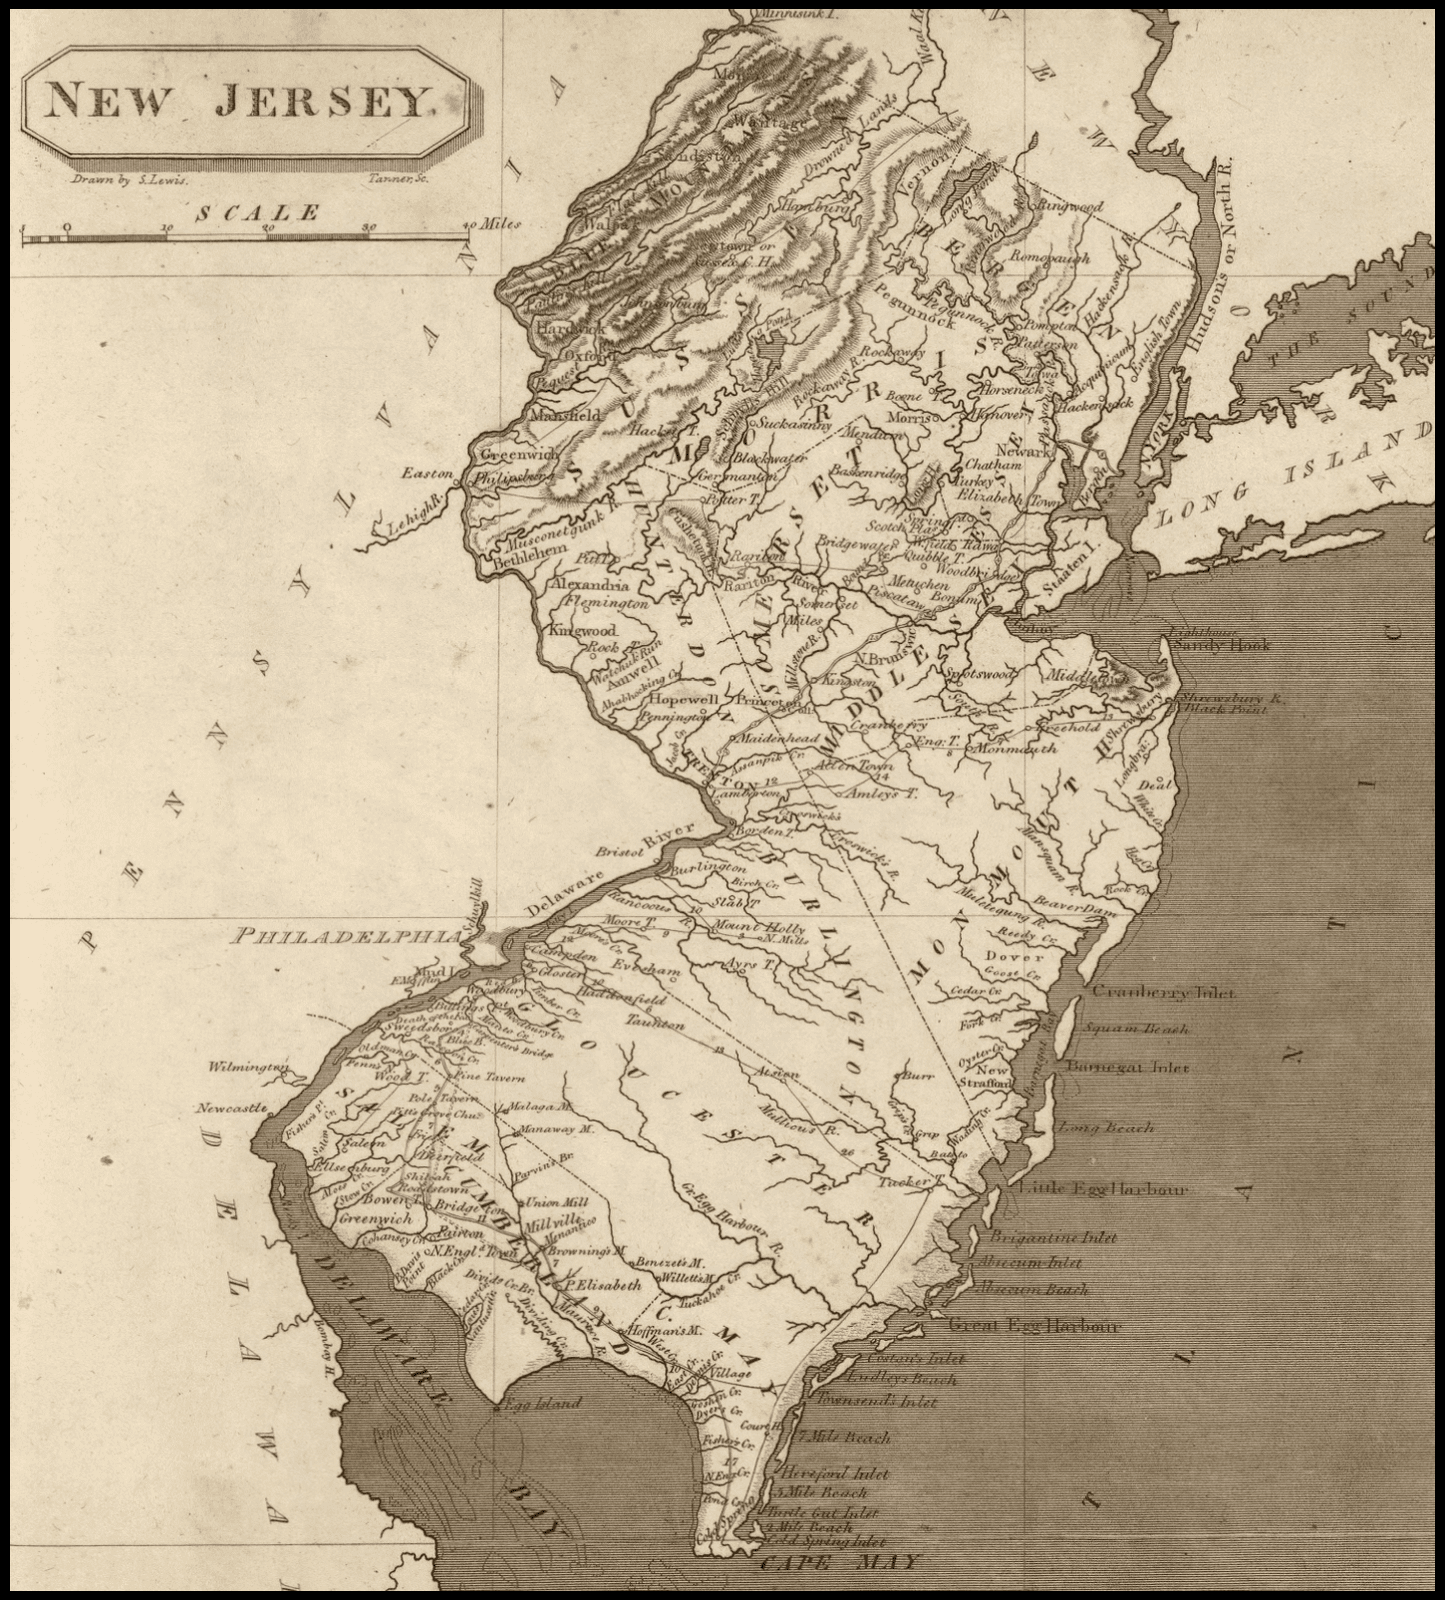 1804: Map of New Jersey